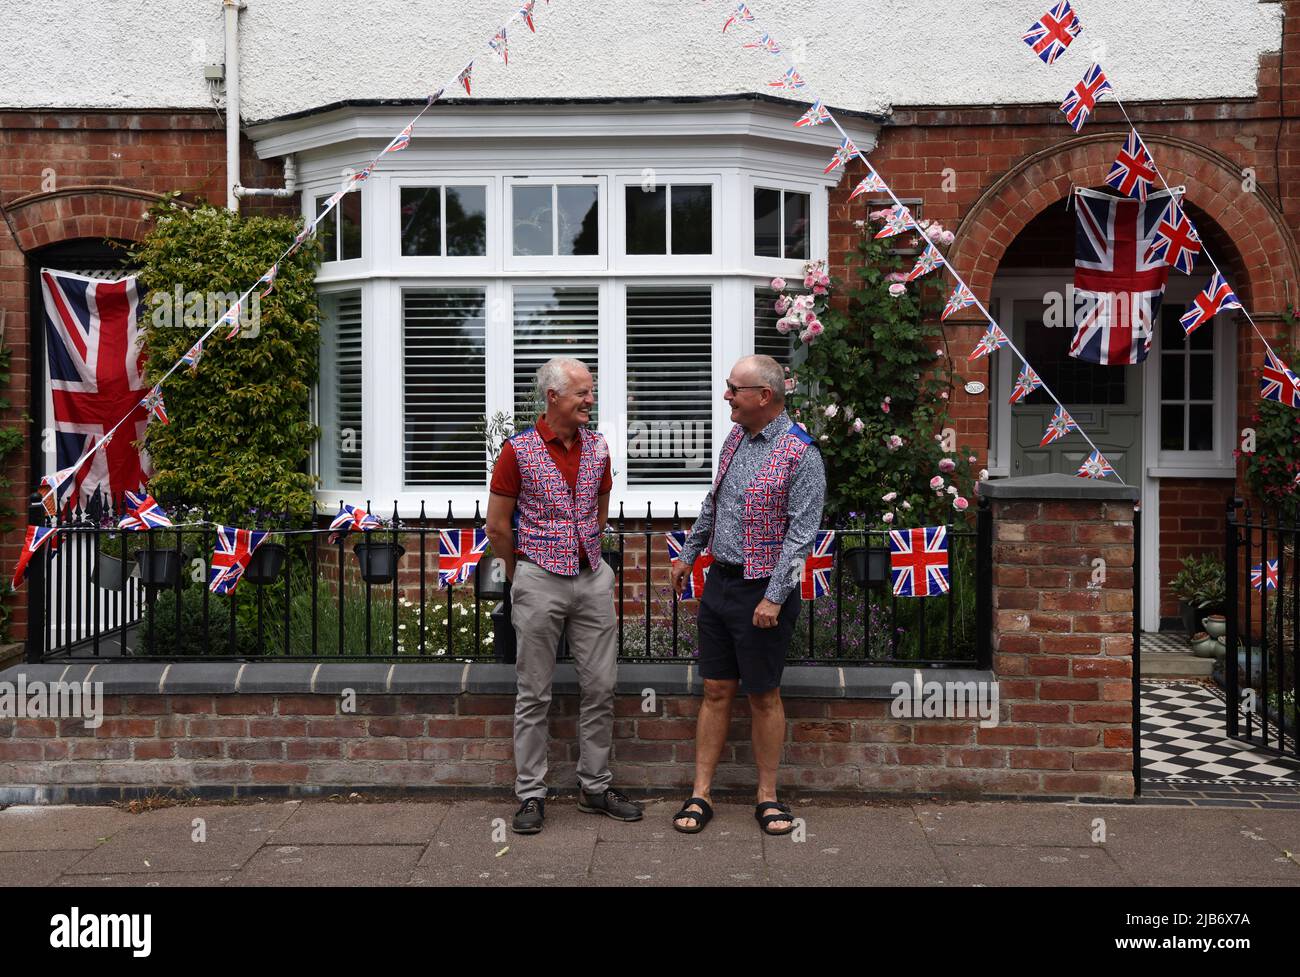 Leicester, Leicestershire, UK. 3rd June 2022. Men wearing Union Jack waistcoats stand outside a decorated house during the Knighton Church Road street party to celebrate the Queen's Platinum Jubilee. Credit Darren Staples/Alamy Live News. Stock Photo